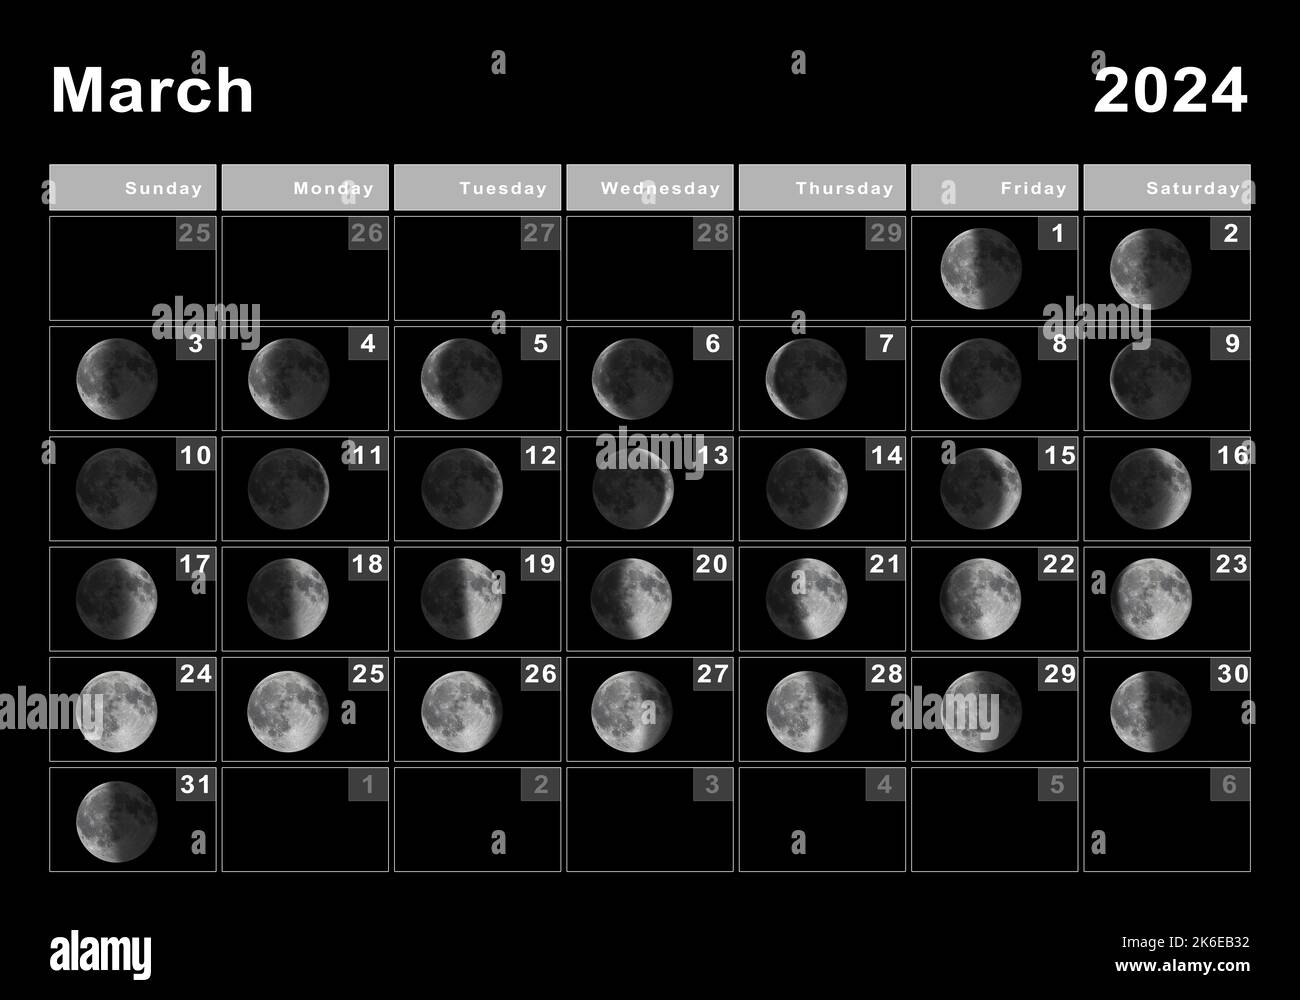 March 2024 Lunar calendar, Moon cycles, Moon Phases Stock Photo Alamy